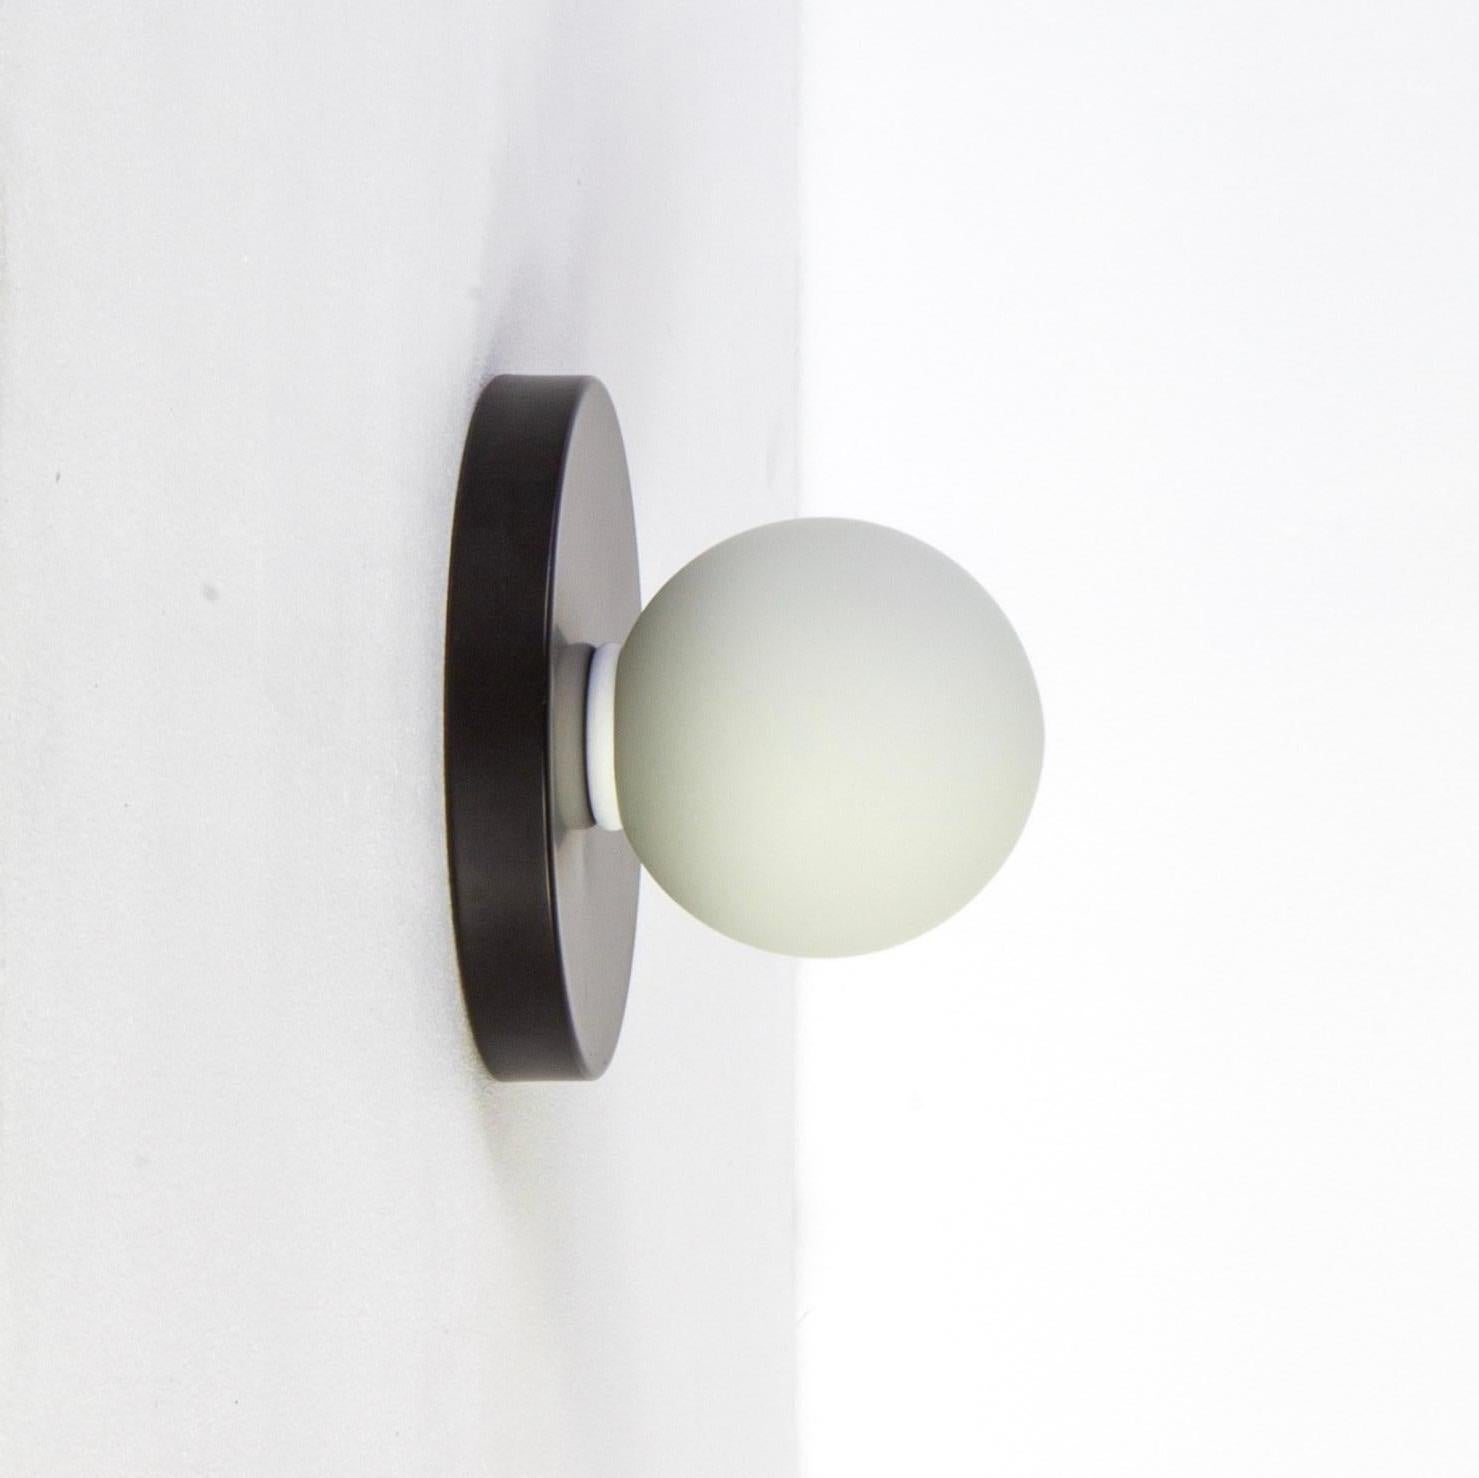 This listing is for 4x Globe Sconces in black designed and manufactured by Research.Lighting.

Materials: Steel & Glass
Finish: Powder-coated steel 
Electronics: 1x G9 Socket, 1x 4.5 Watt LED Bulb (included), 450 Lumens
ADA Compliant. UL Listed.